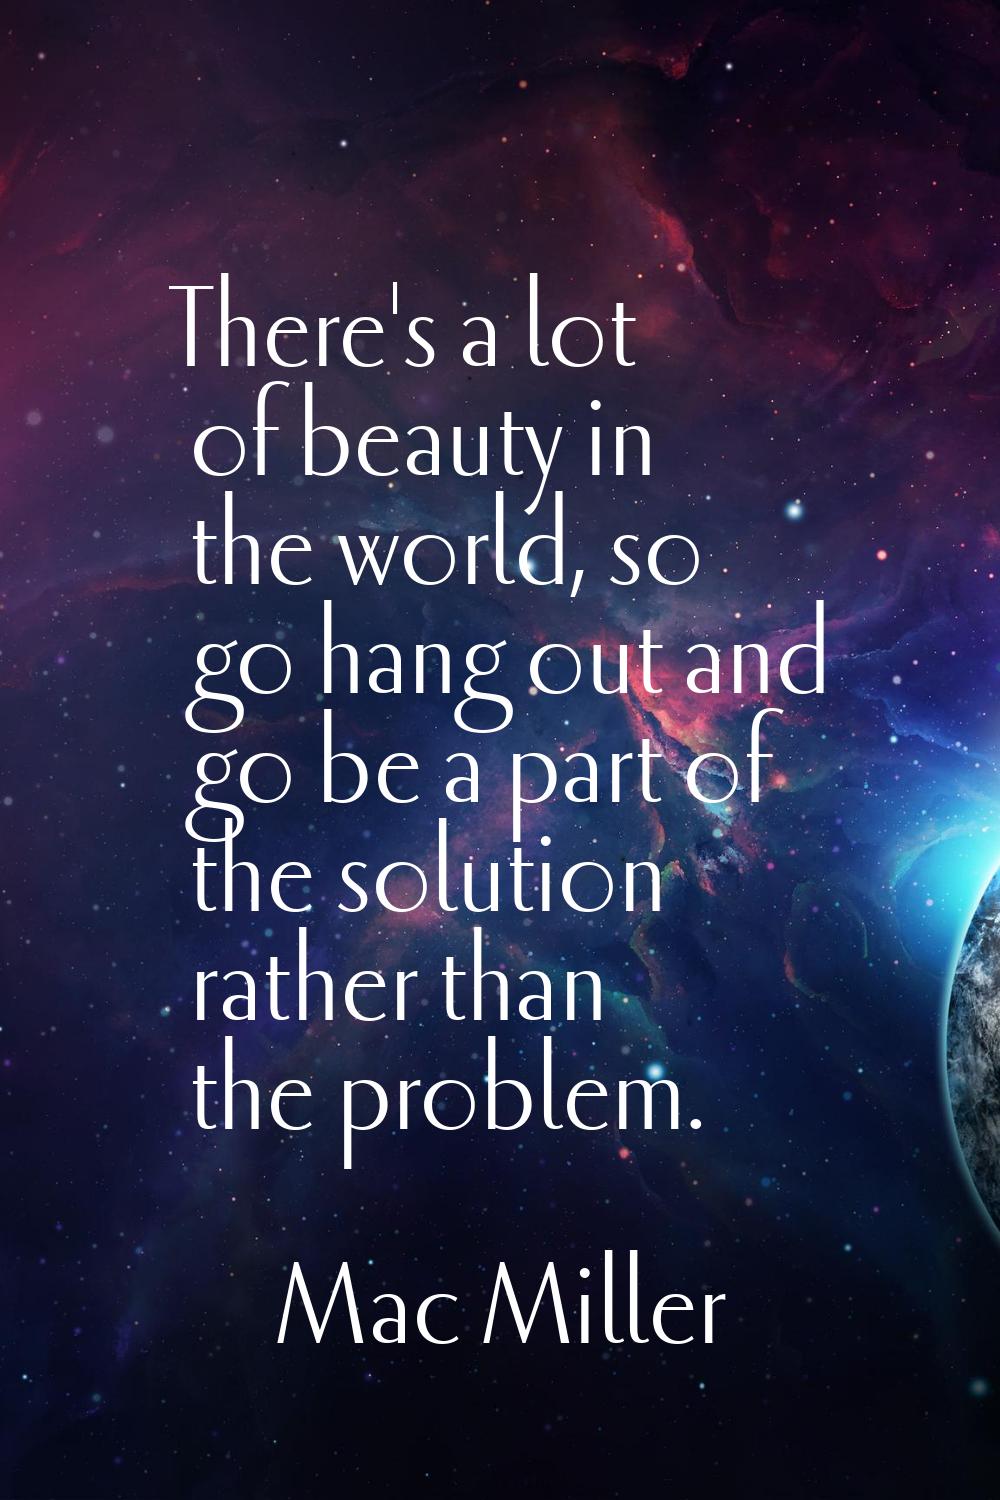 There's a lot of beauty in the world, so go hang out and go be a part of the solution rather than t